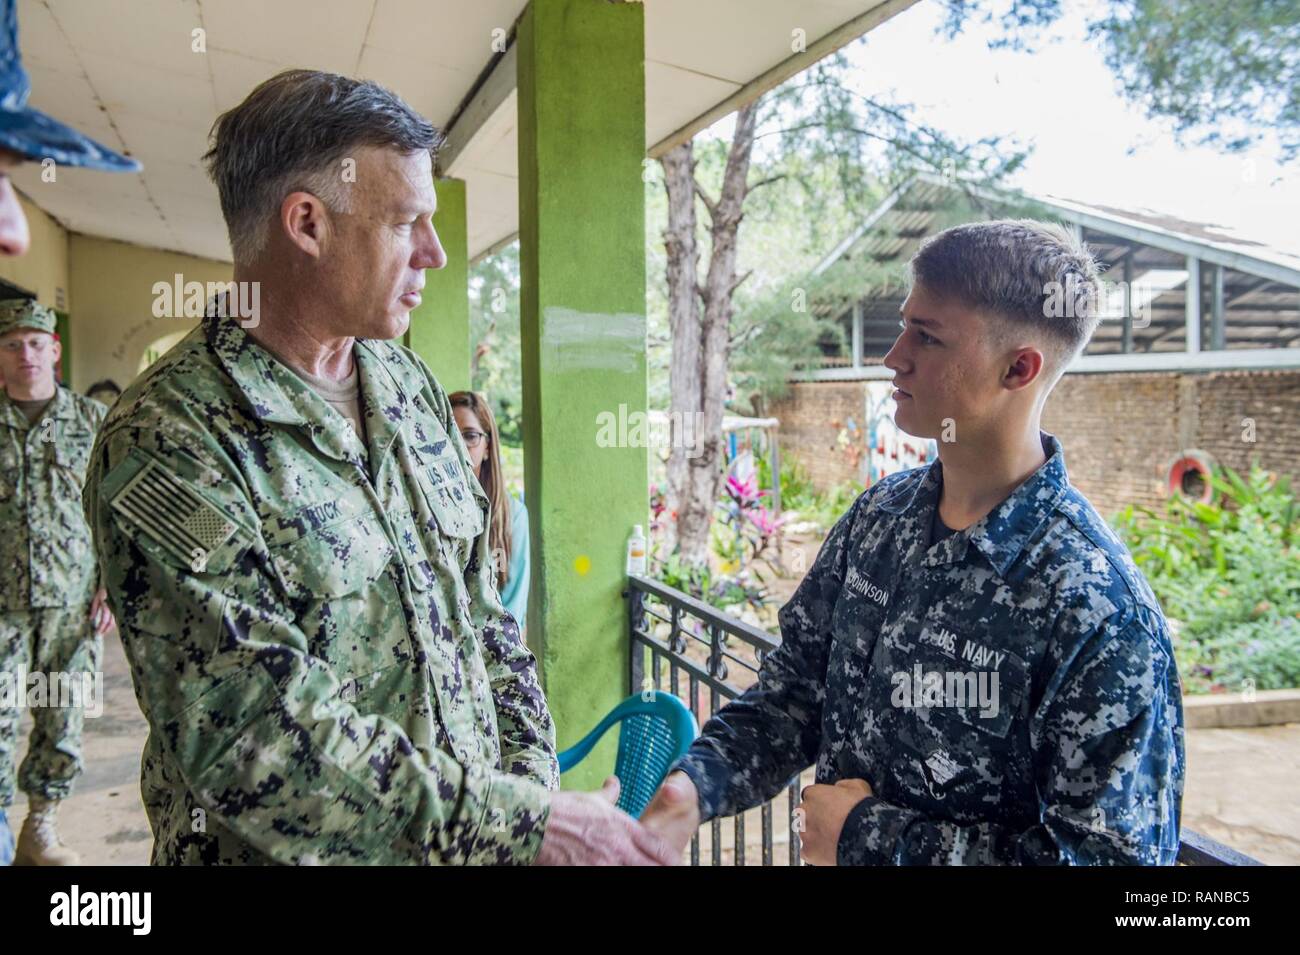 TRUJILLO, Honduras (Feb. 23, 2017) – Rear Adm. Sean S. Buck, Commander U.S. Naval Forces Southern Command/U.S. 4th Fleet NAVSO/FOURTHFLT), speaks with Hospitalman Kraylor Kirk-Johnson, a native of Laguna Beach, Calif., assigned to Naval Branch Health Clinic Jacksonville, Fla., during a tour of the Continuing Promise 2017 (CP-17) medical site in Trujillo, Honduras. CP-17 is a U.S. Southern Command-sponsored and U.S. Naval Forces Southern Command/U.S. 4th Fleet-conducted deployment to conduct civil-military operations including humanitarian assistance, training engagements, and medical, dental,  Stock Photo